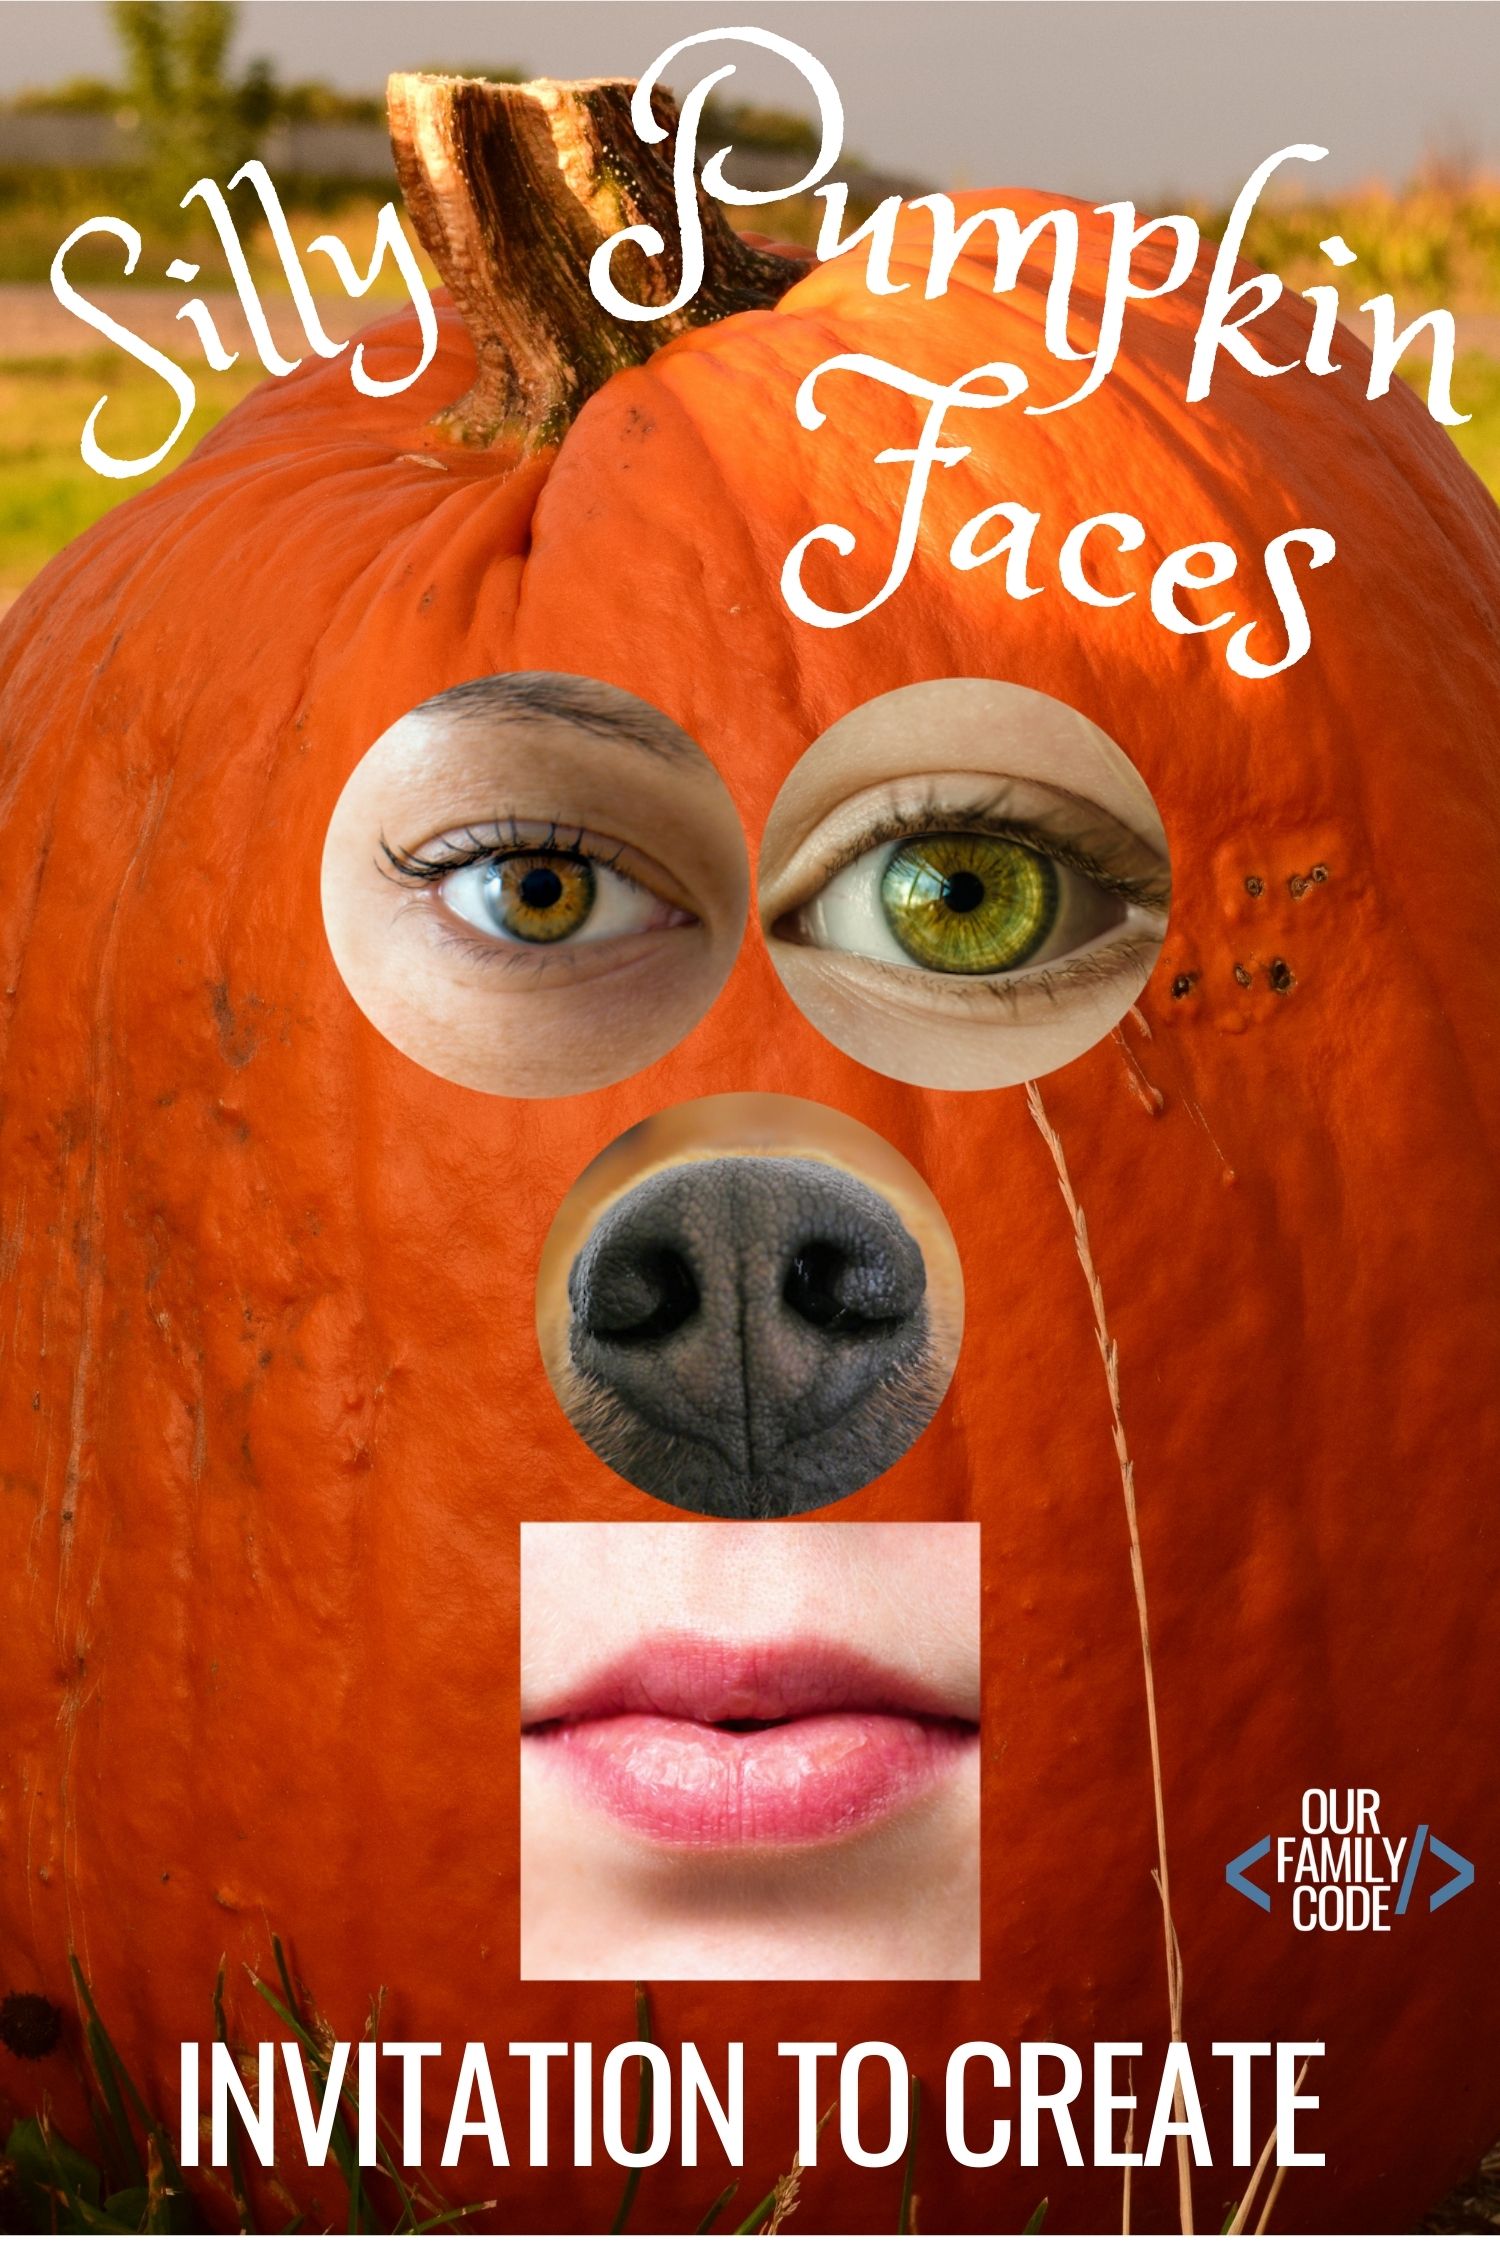 learn about emotions and faces with silly pumpkin faces